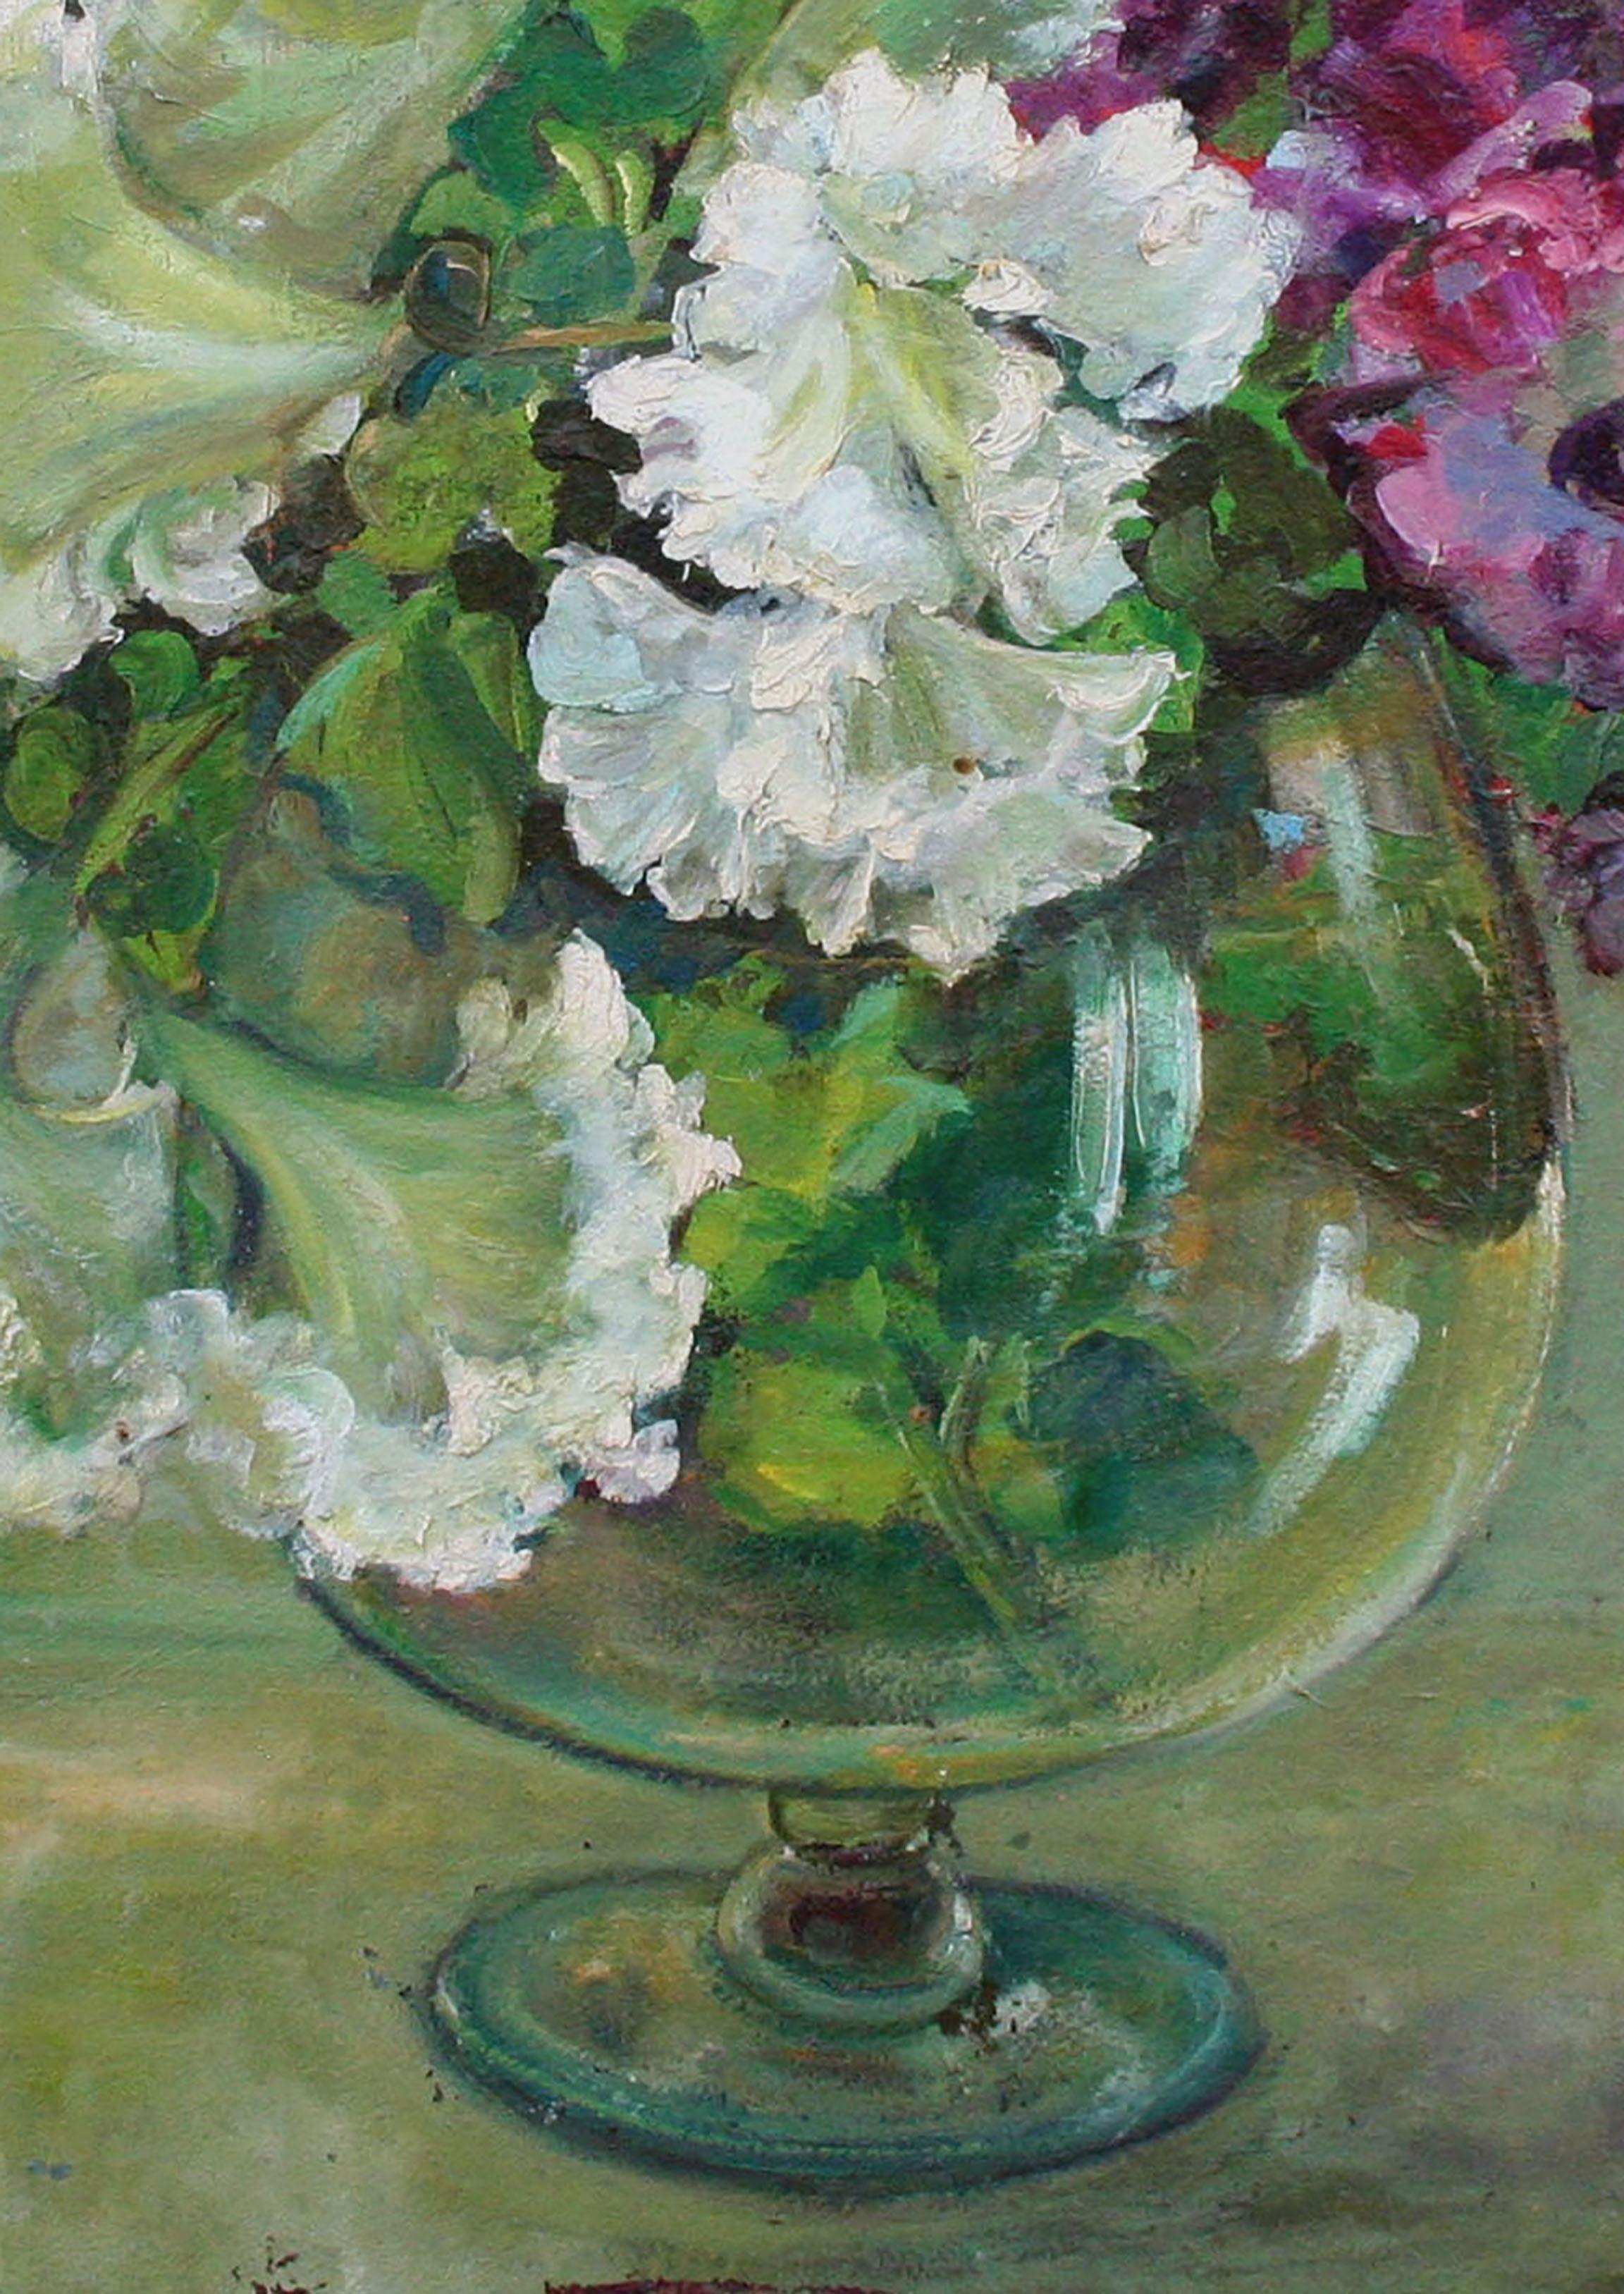 Mid Century Floral Still Life - Petunias in a Glass  - American Impressionist Painting by Helen Enoch Gleiforst